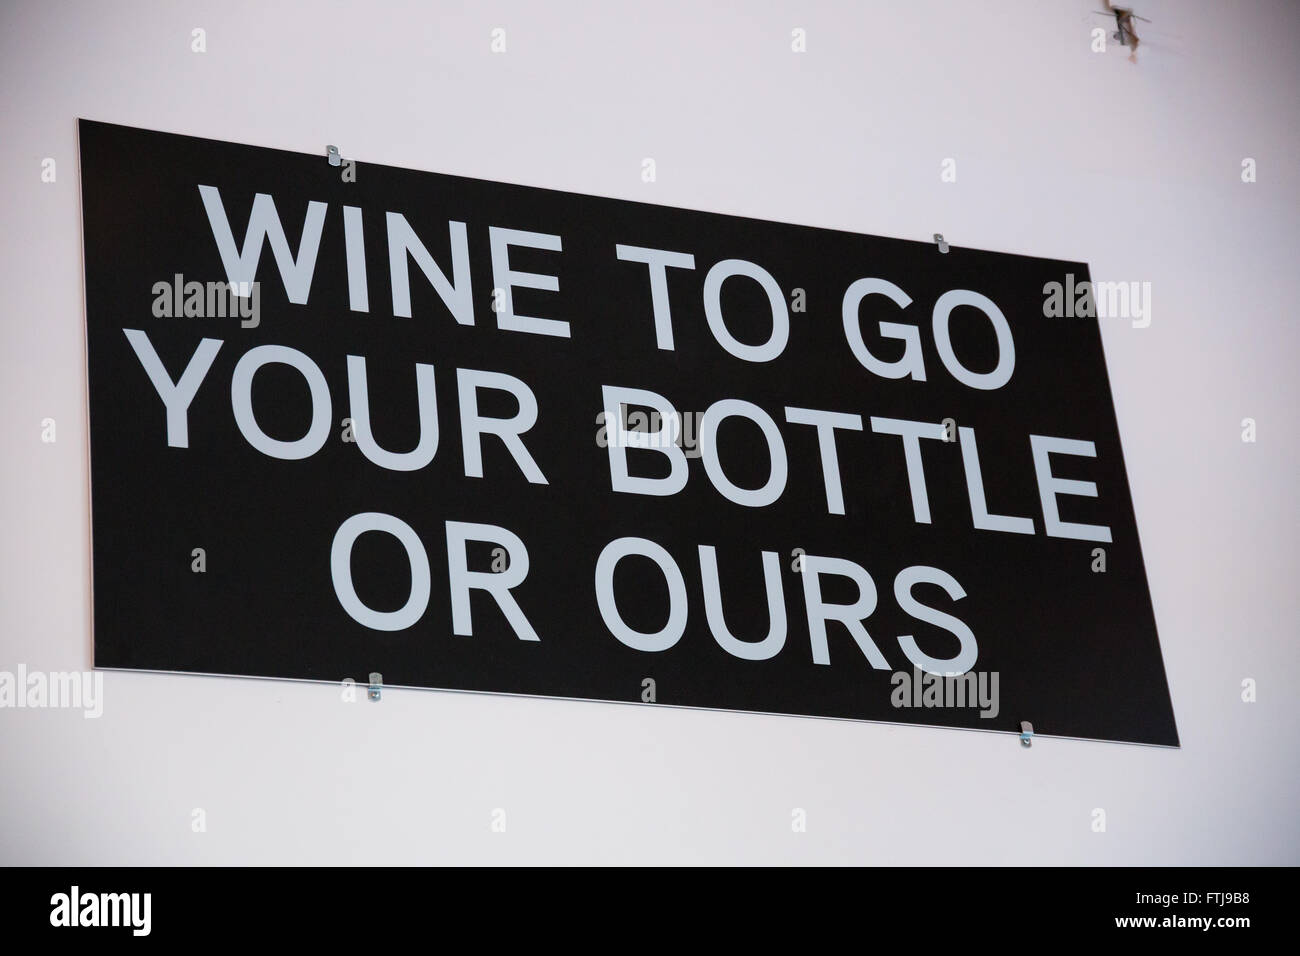 Winery that sells growler fills of wine has a sign that says wine to go your bottle or ours. Stock Photo